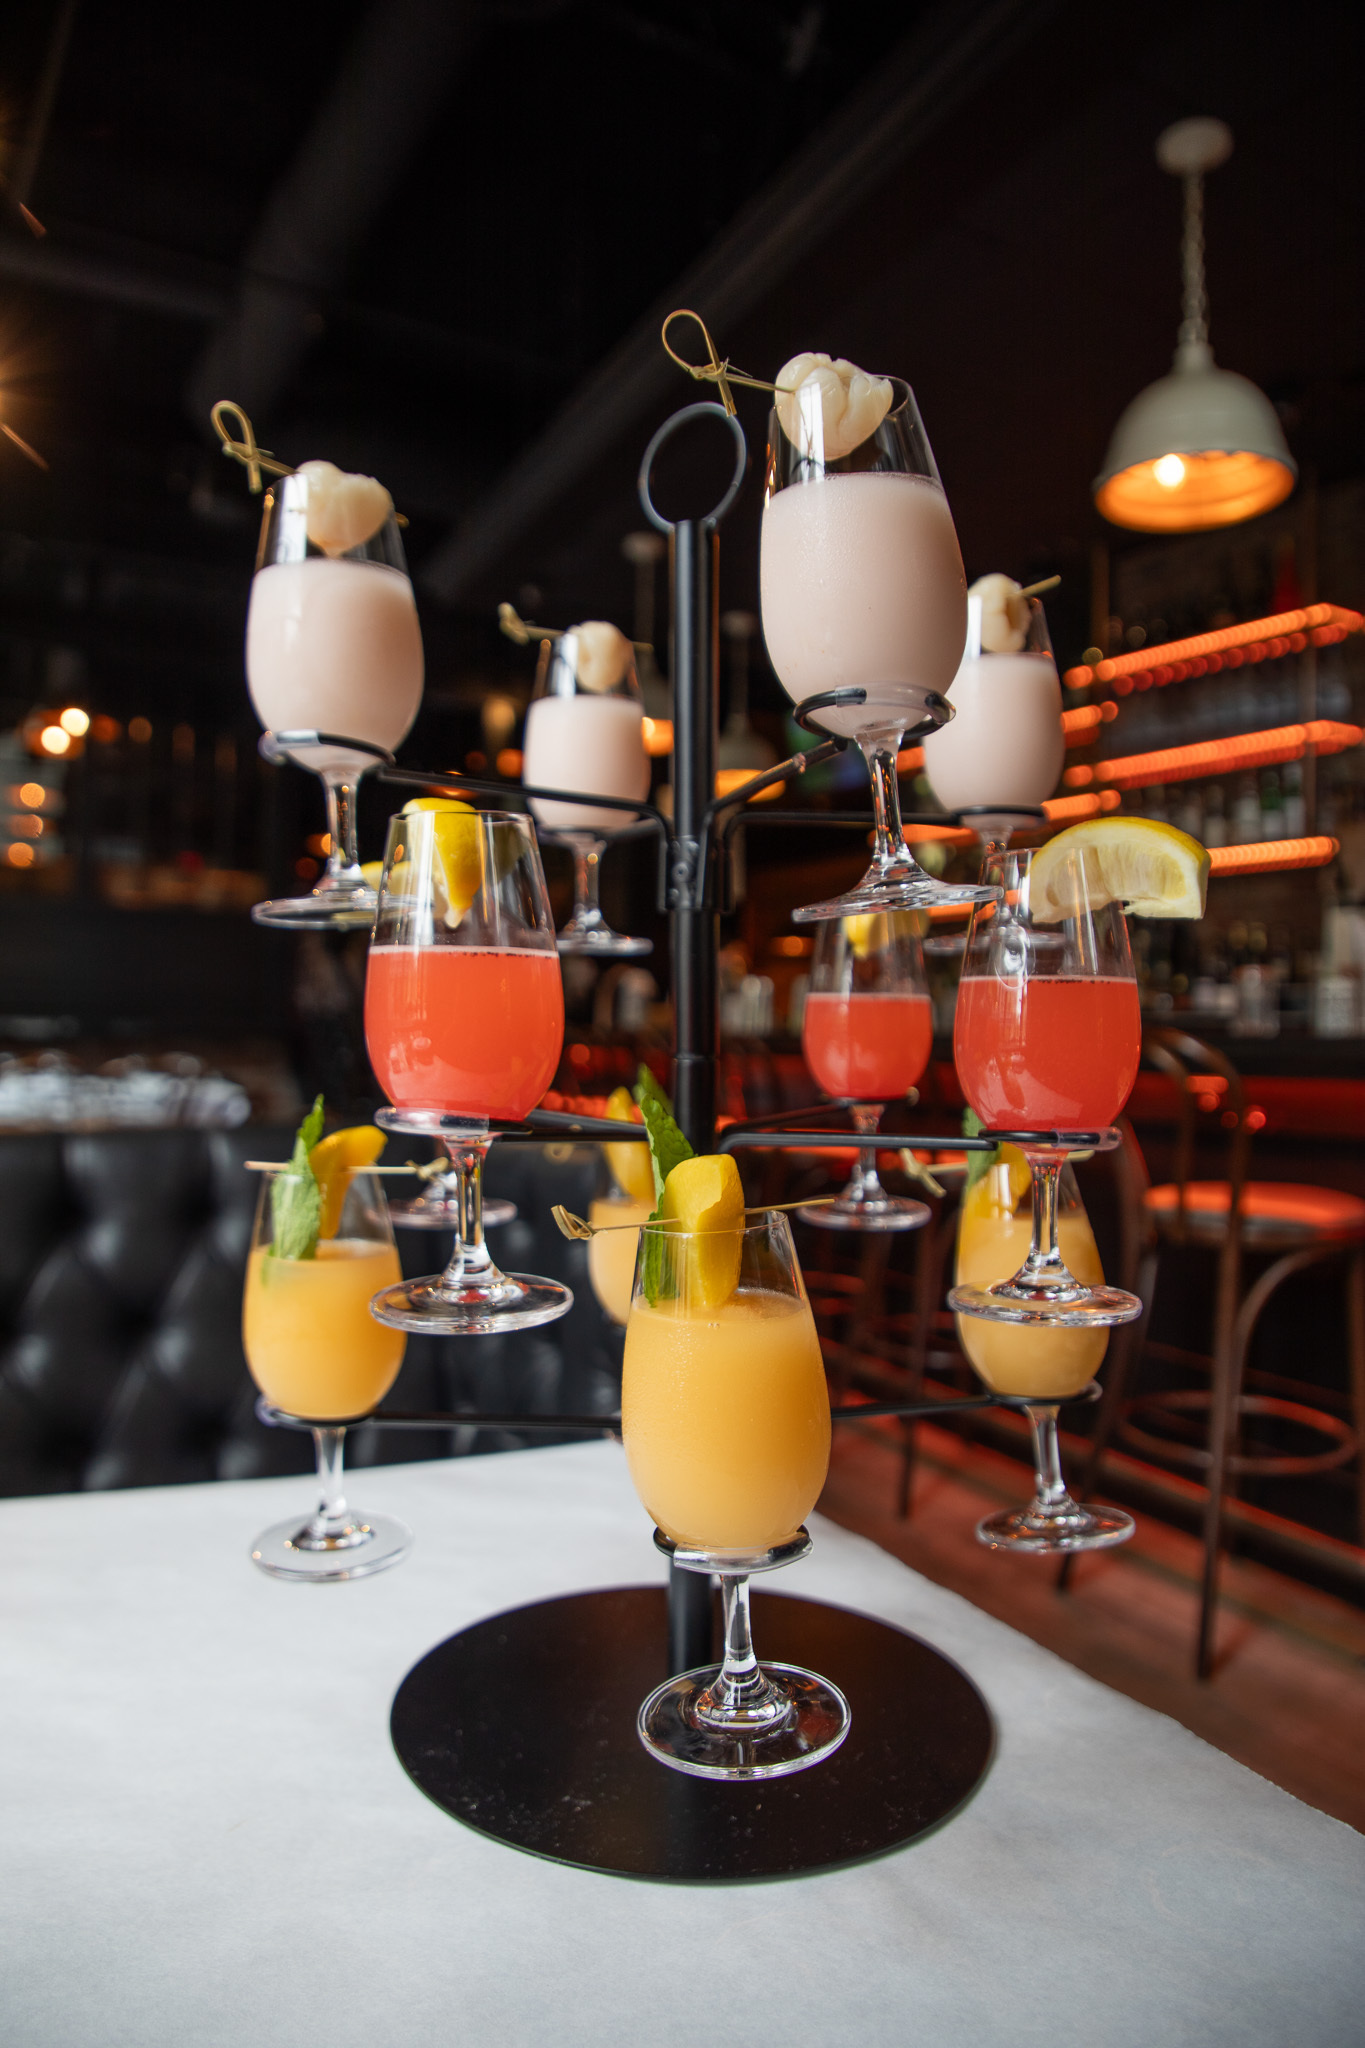 You can get a 12-drink cocktail tower at this NYC steakhouse